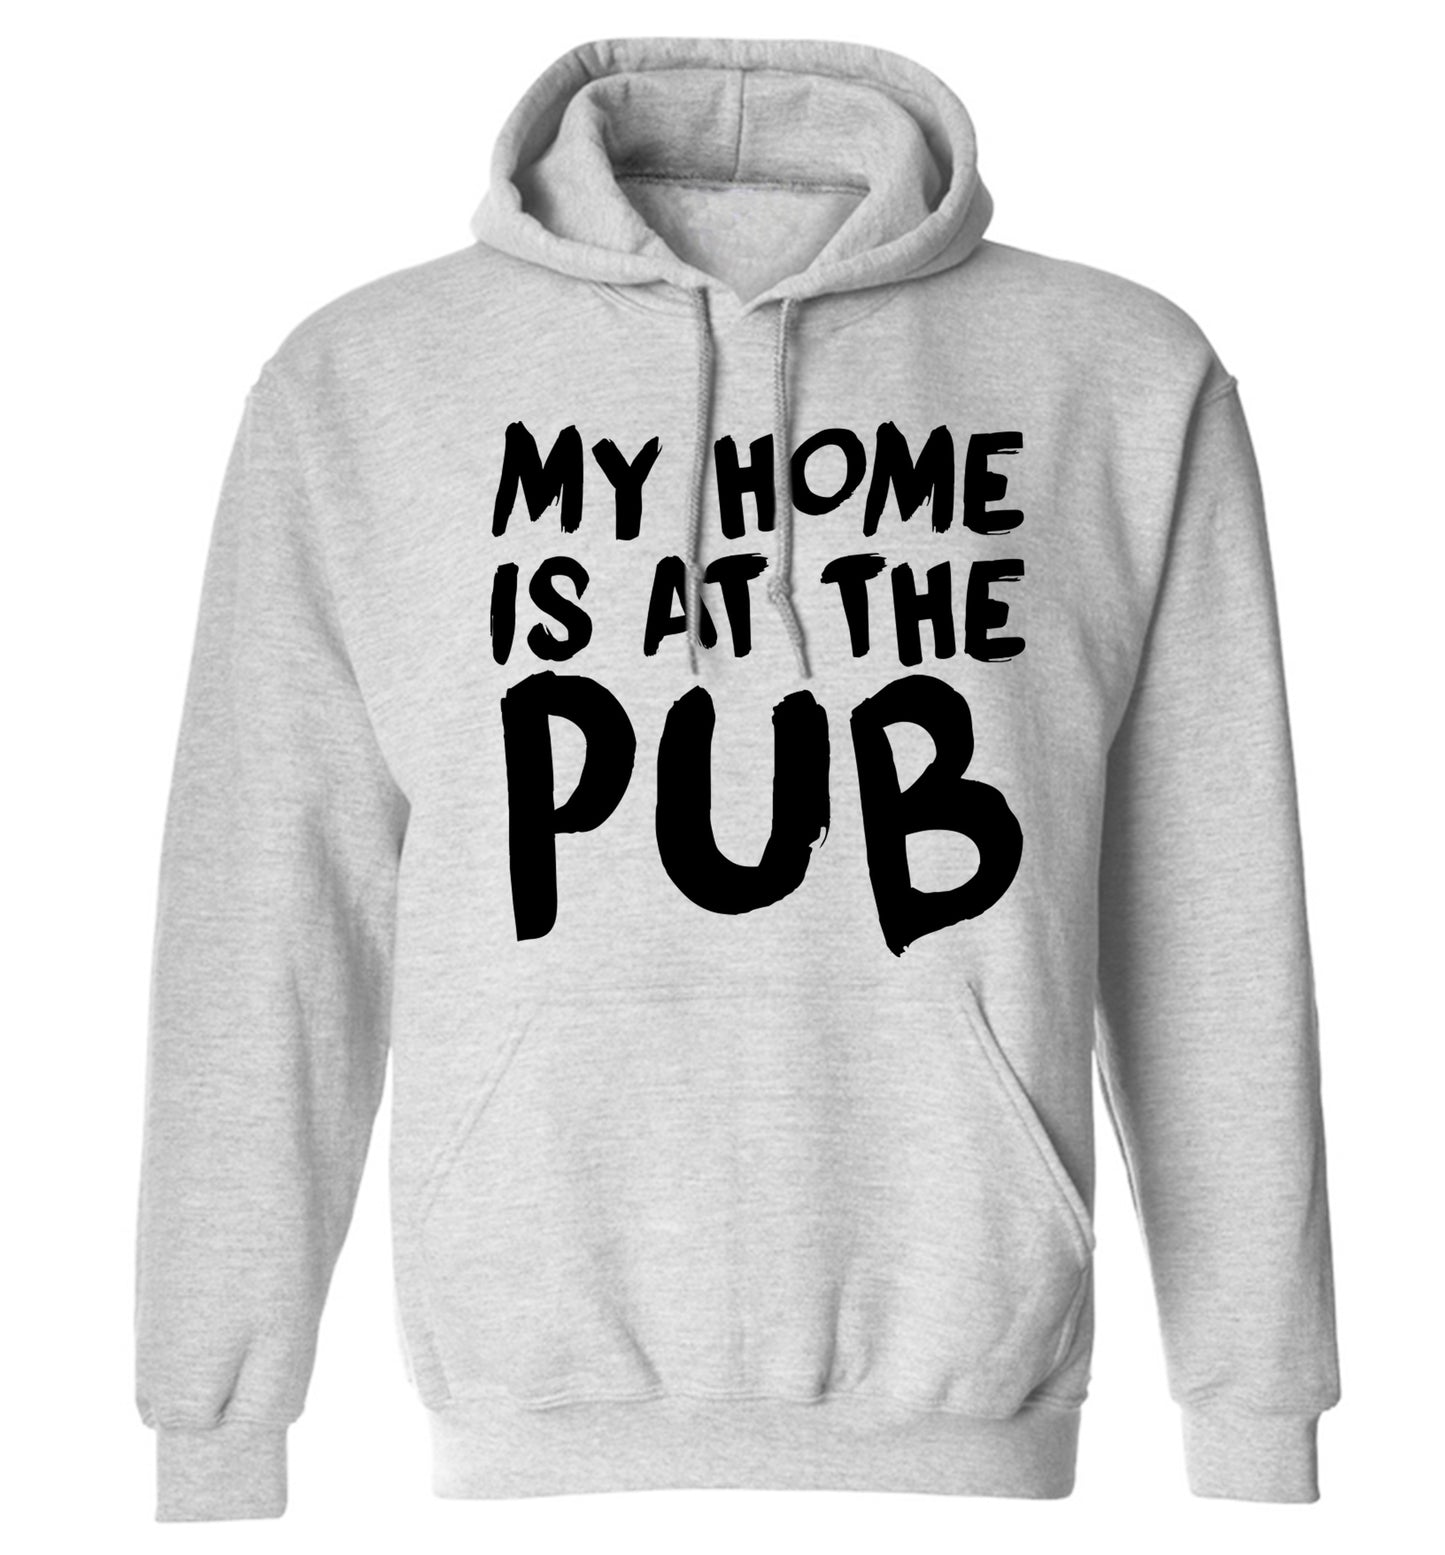 My home is at the pub adults unisex grey hoodie 2XL